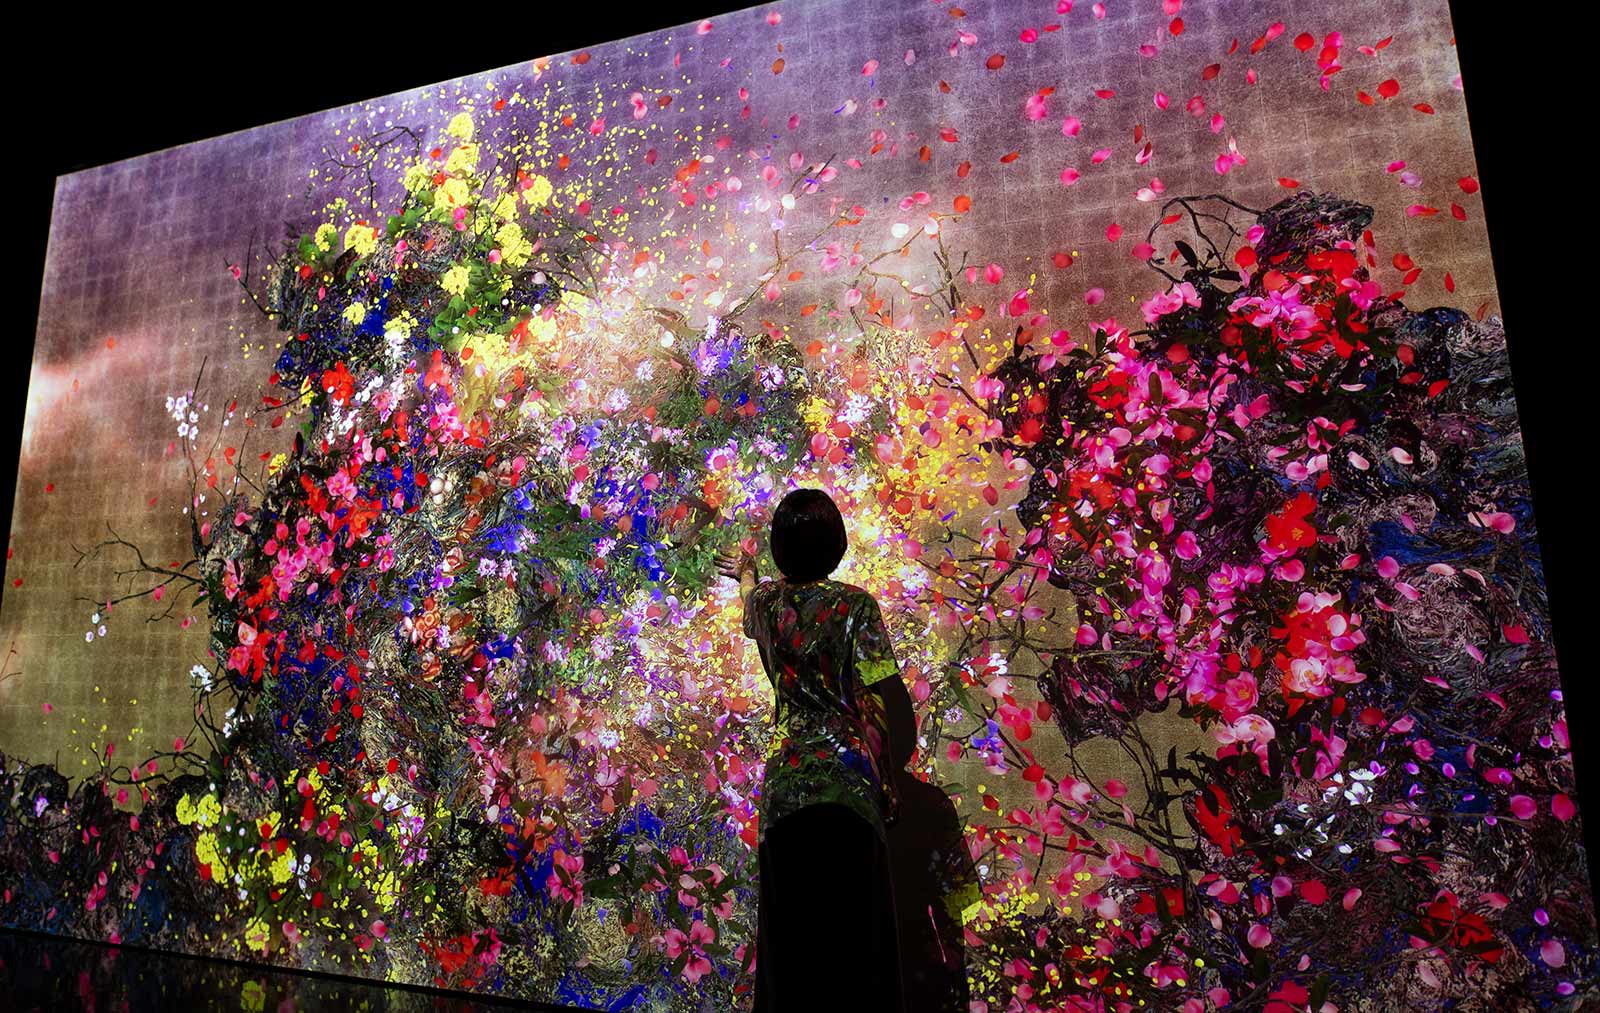 teamLab-SuperNature-Macao-Continuous-Life-and-Death-at-the-Now-of-Eternity-Cannot-be-Controlled-but-Live-Together